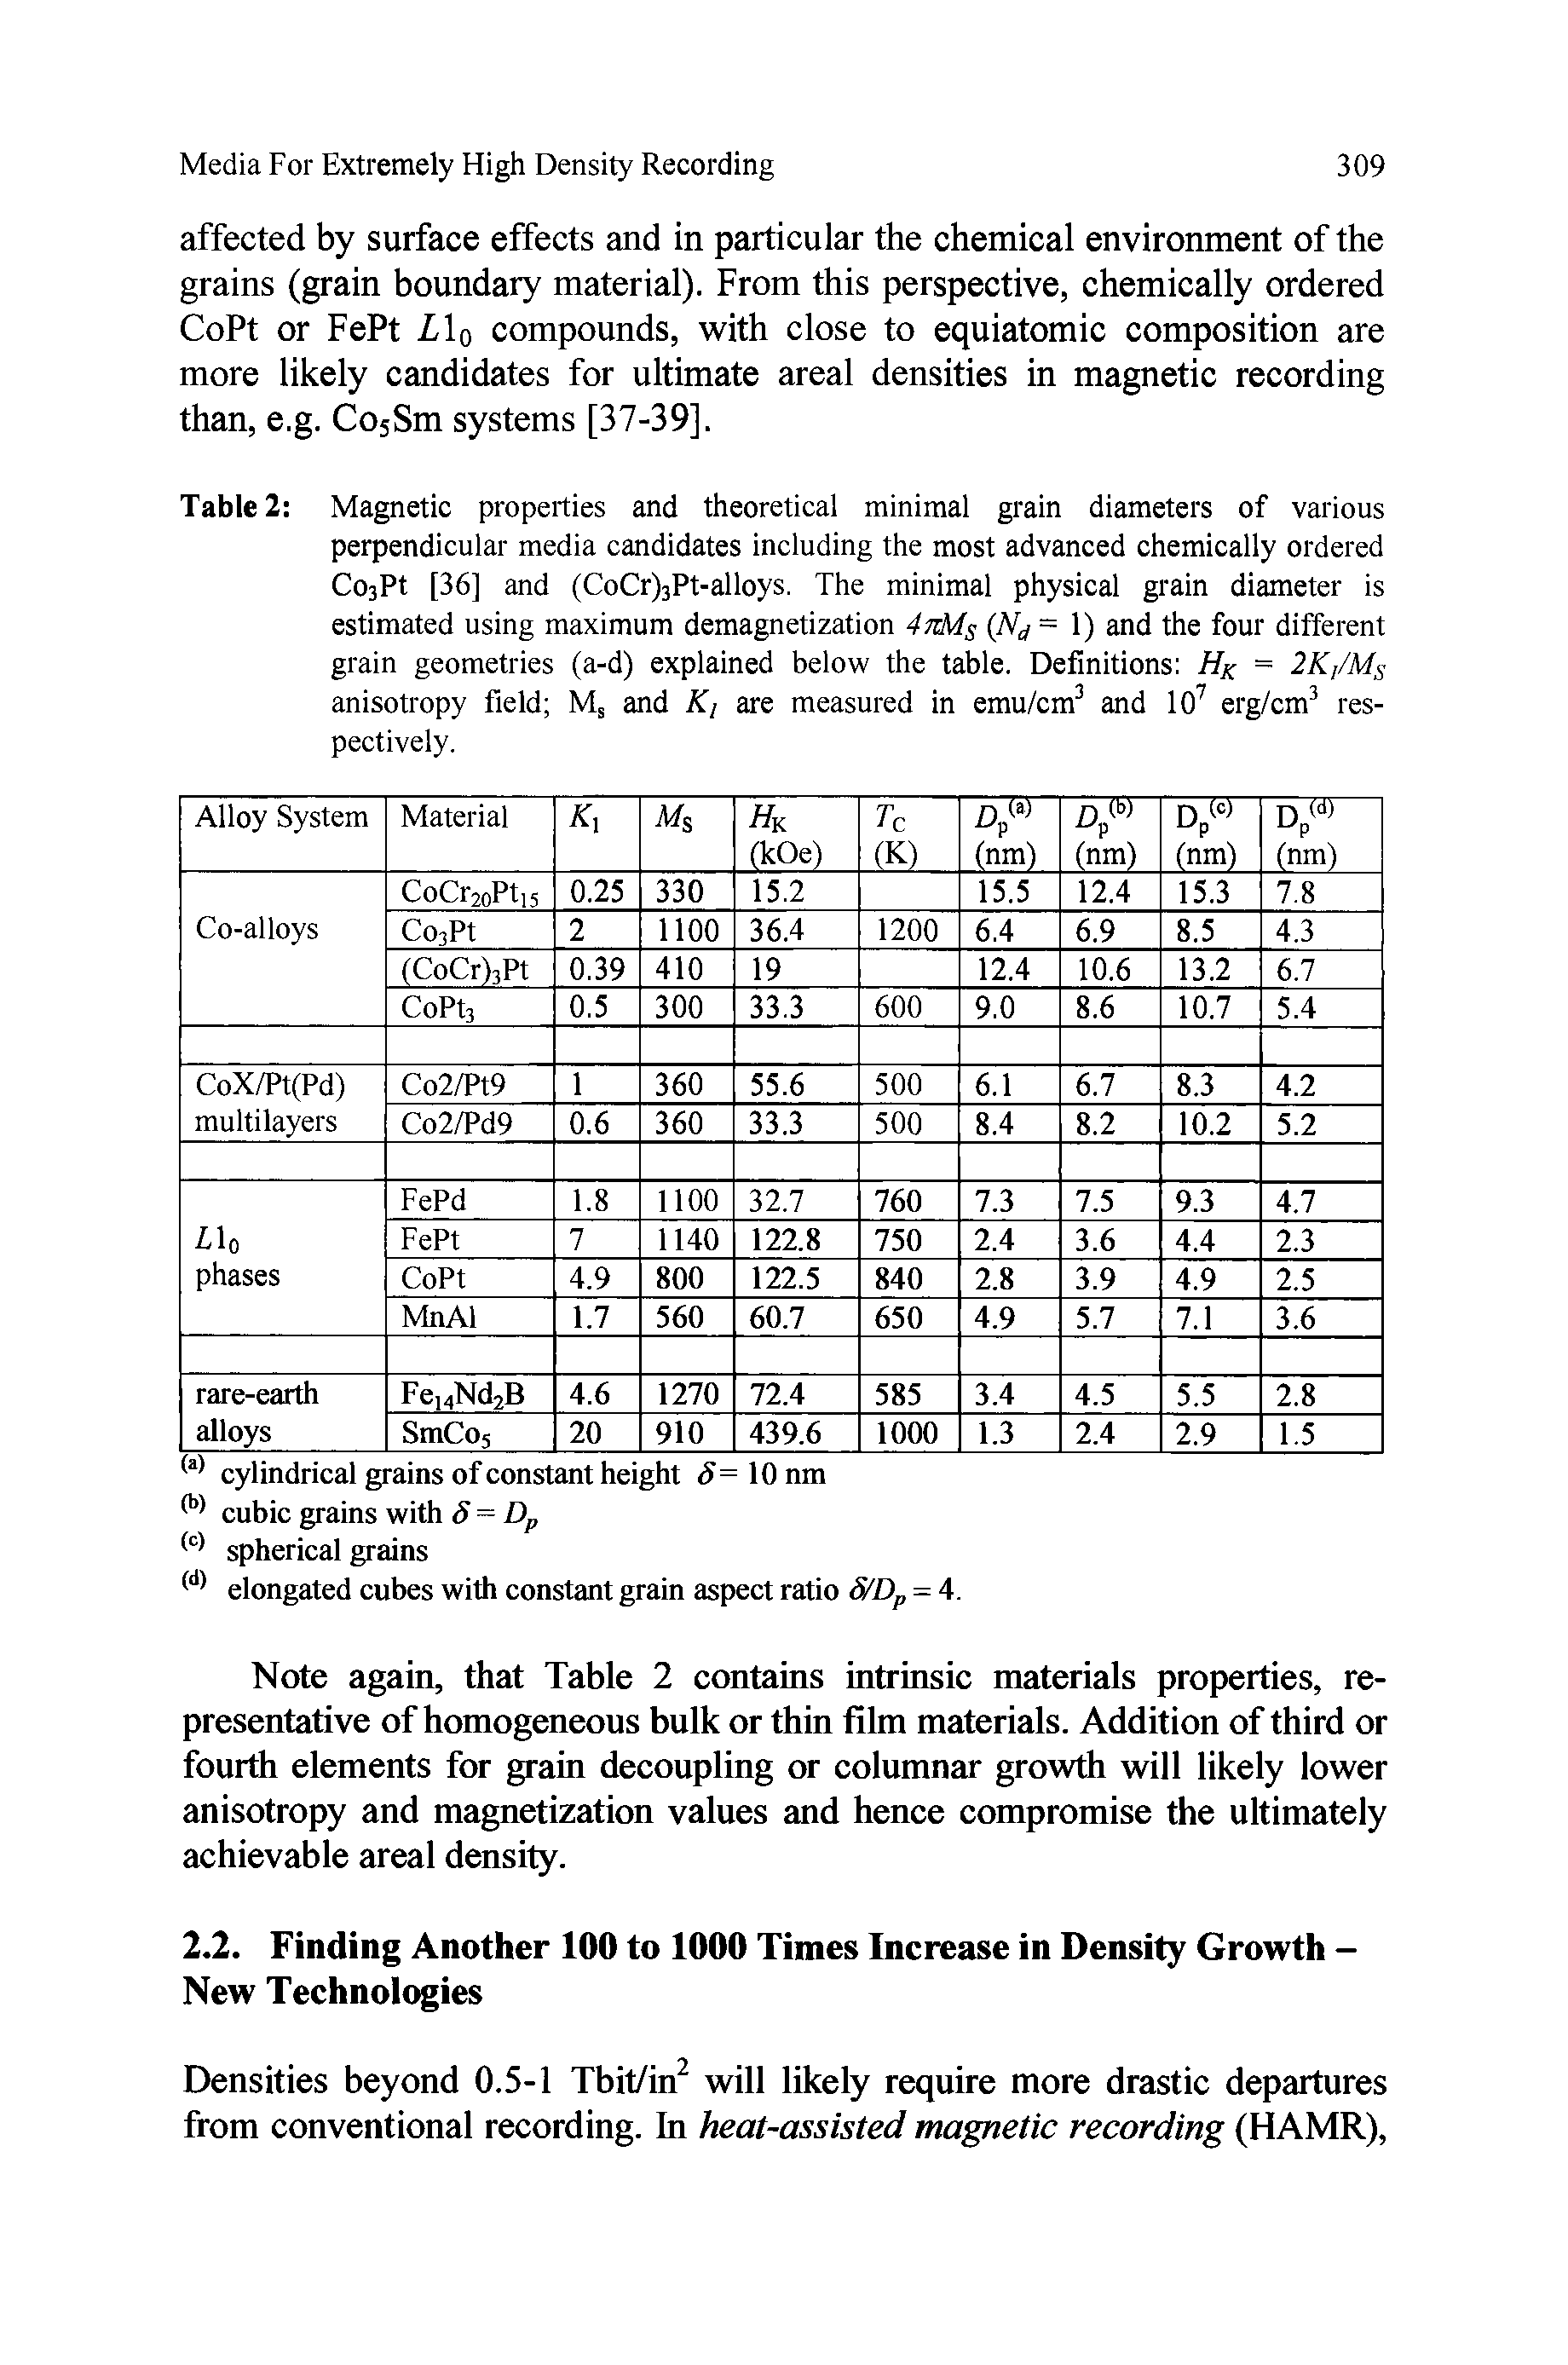 Table 2 Magnetic properties and theoretical minimal grain diameters of various perpendicular media candidates including the most advanced chemically ordered Co3Pt [36] and (CoCr)3Pt-alloys. The minimal physical grain diameter is estimated using maximum demagnetization 4jzMs (Nd = 1) and the four different grain geometries (a-d) explained below the table. Definitions HK = 2K,/MS anisotropy field Ms and Kt are measured in emu/cm3 and 107 erg/cm3 respectively.